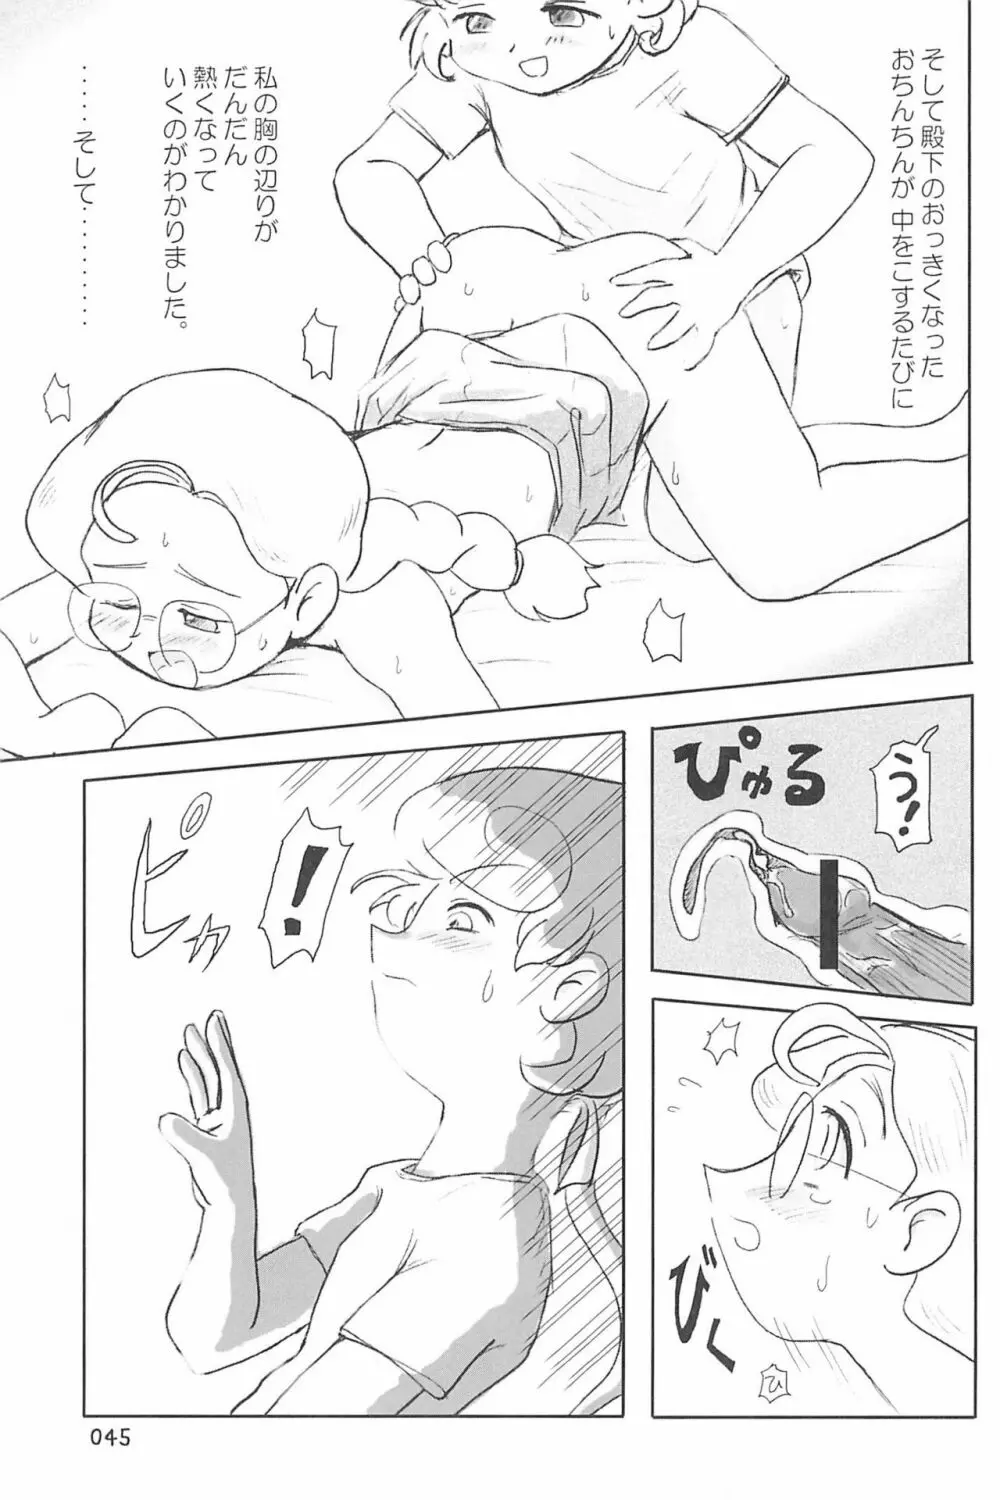 ND-special Volume 4 45ページ